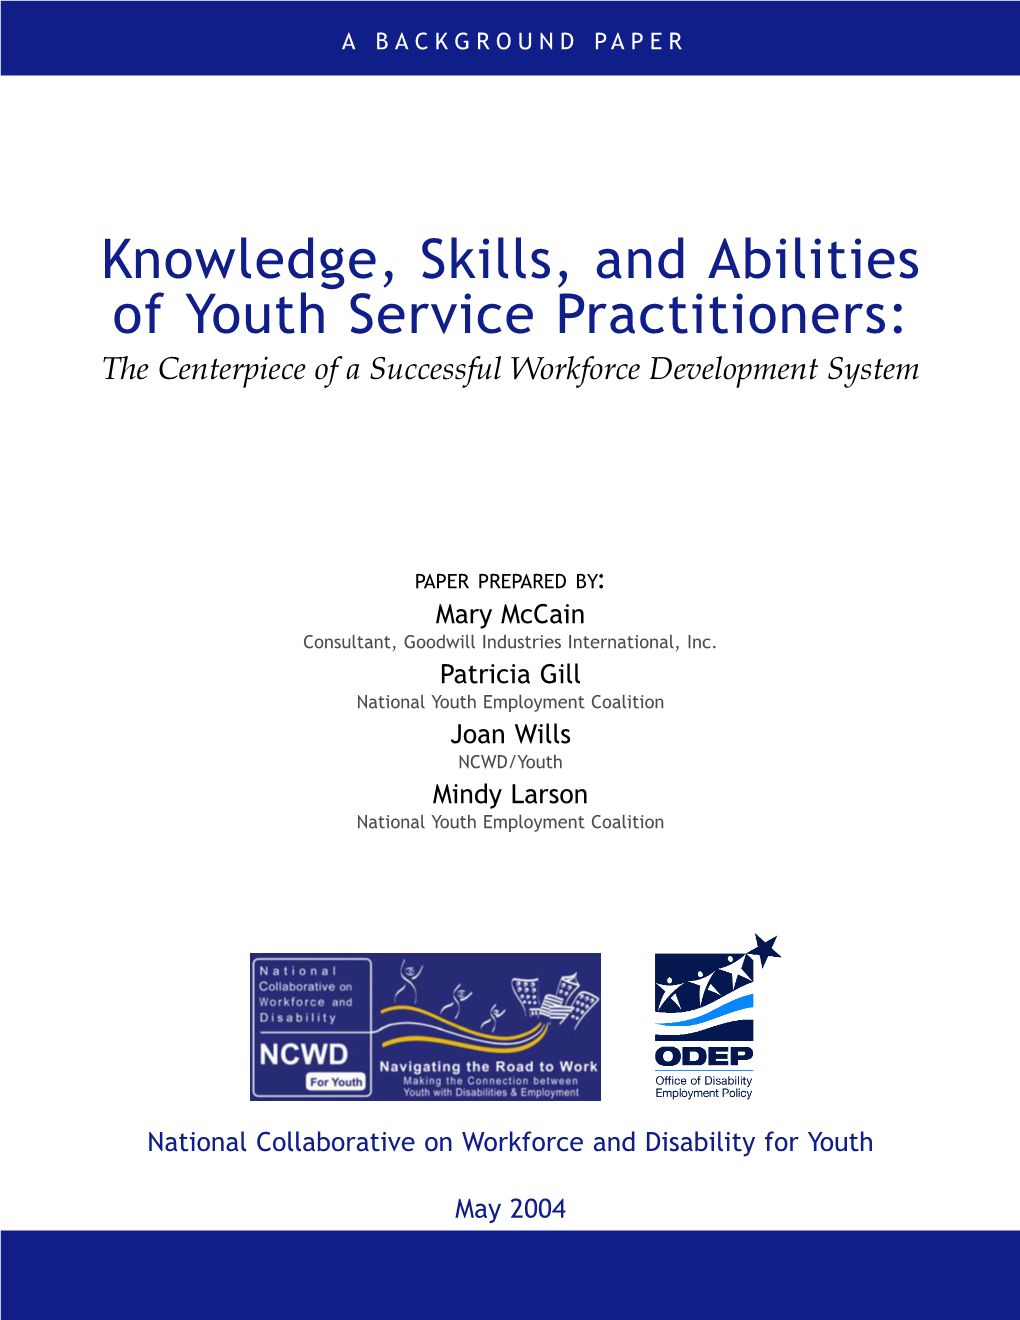 Knowledge, Skills, and Abilities of Youth Service Practitioners: the Centerpiece of a Successful Workforce Development System